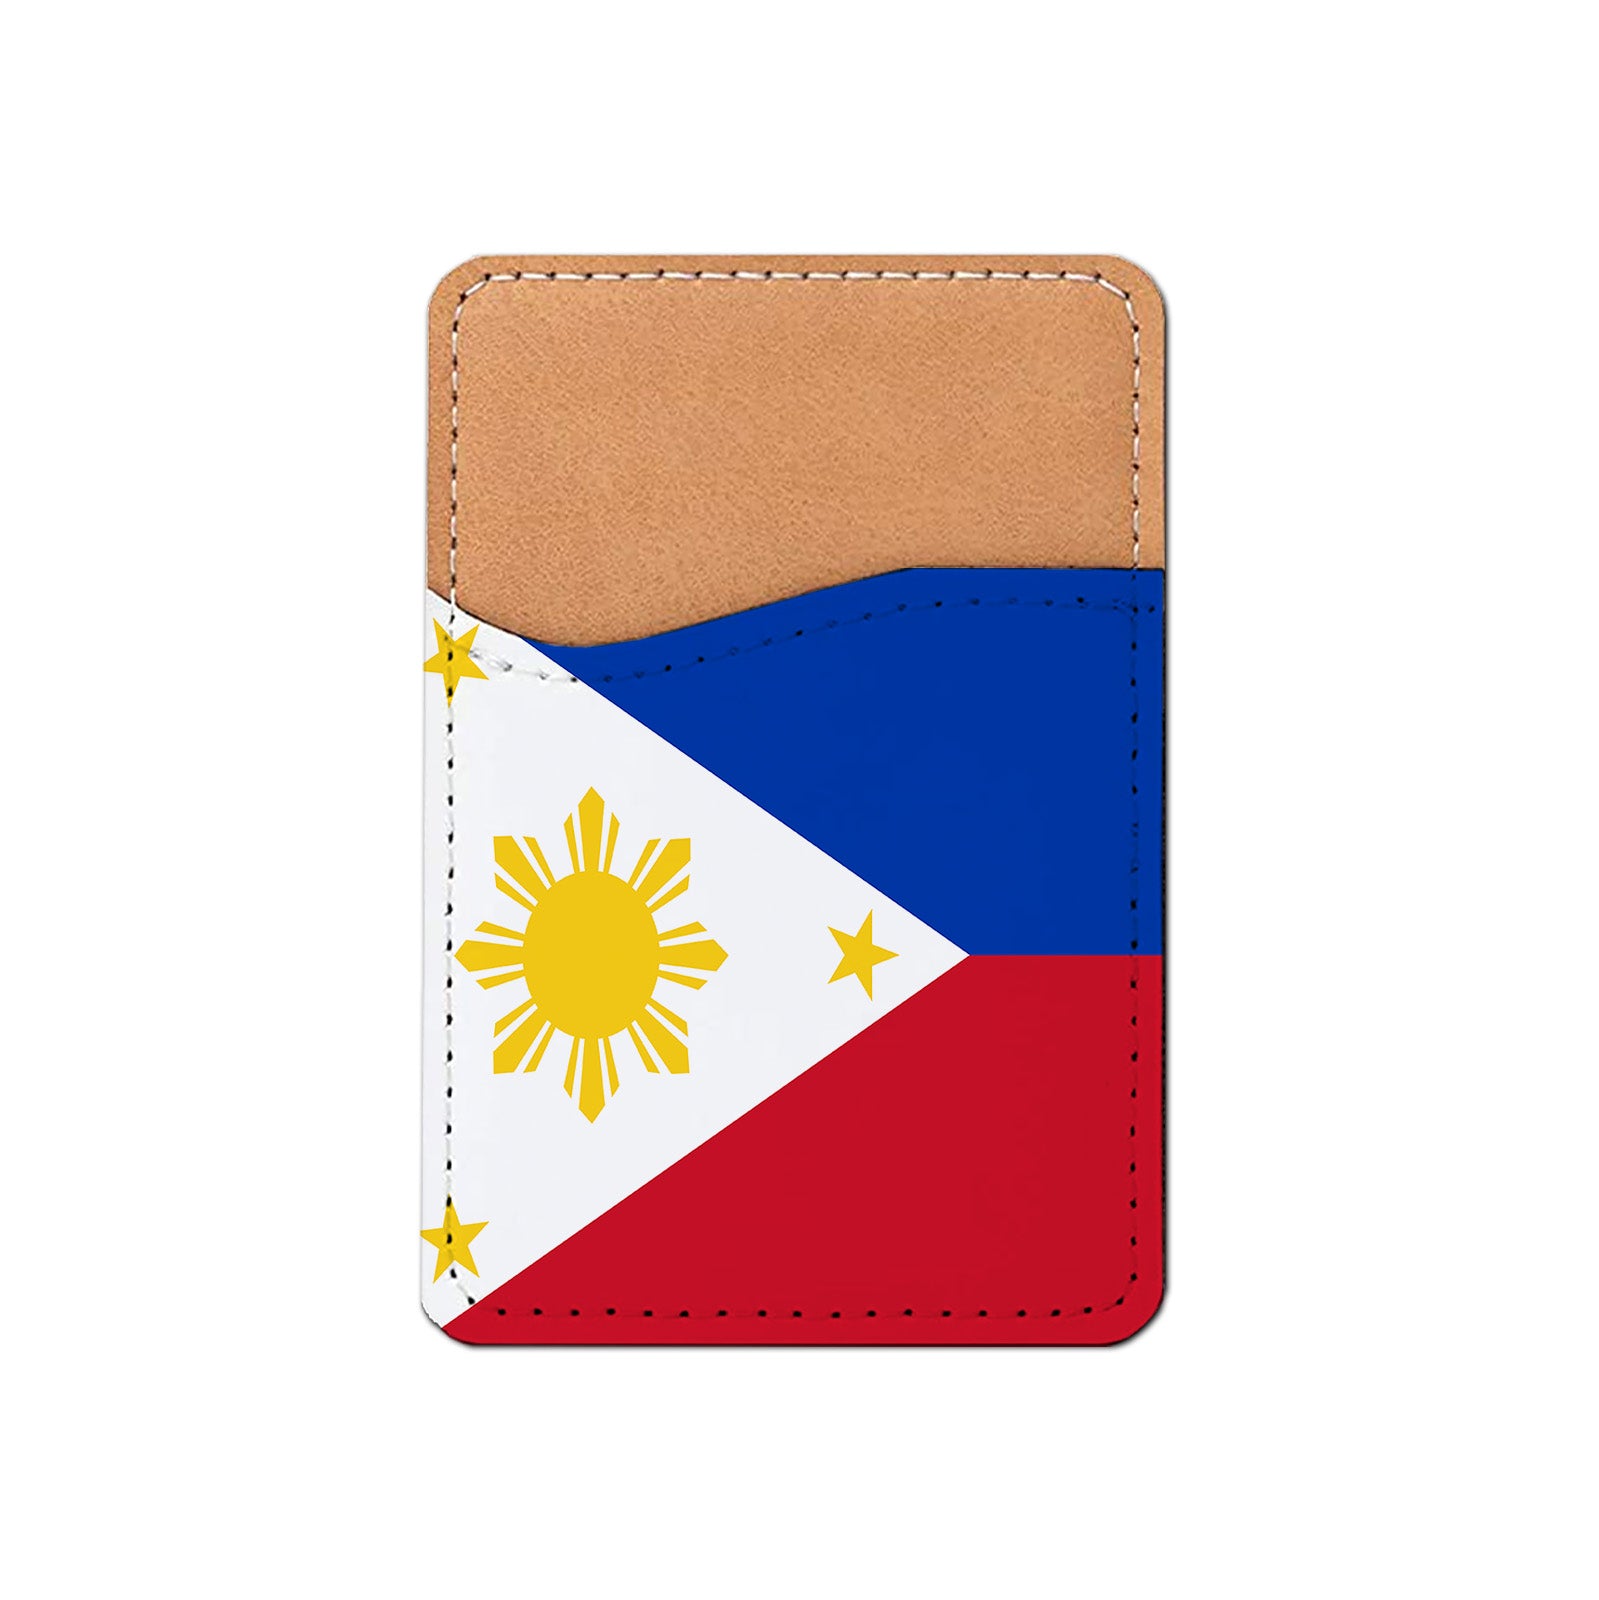 Pick Your World Flag - Stick On PU Leather Phone Wallet Card Holder for 1-2 cards